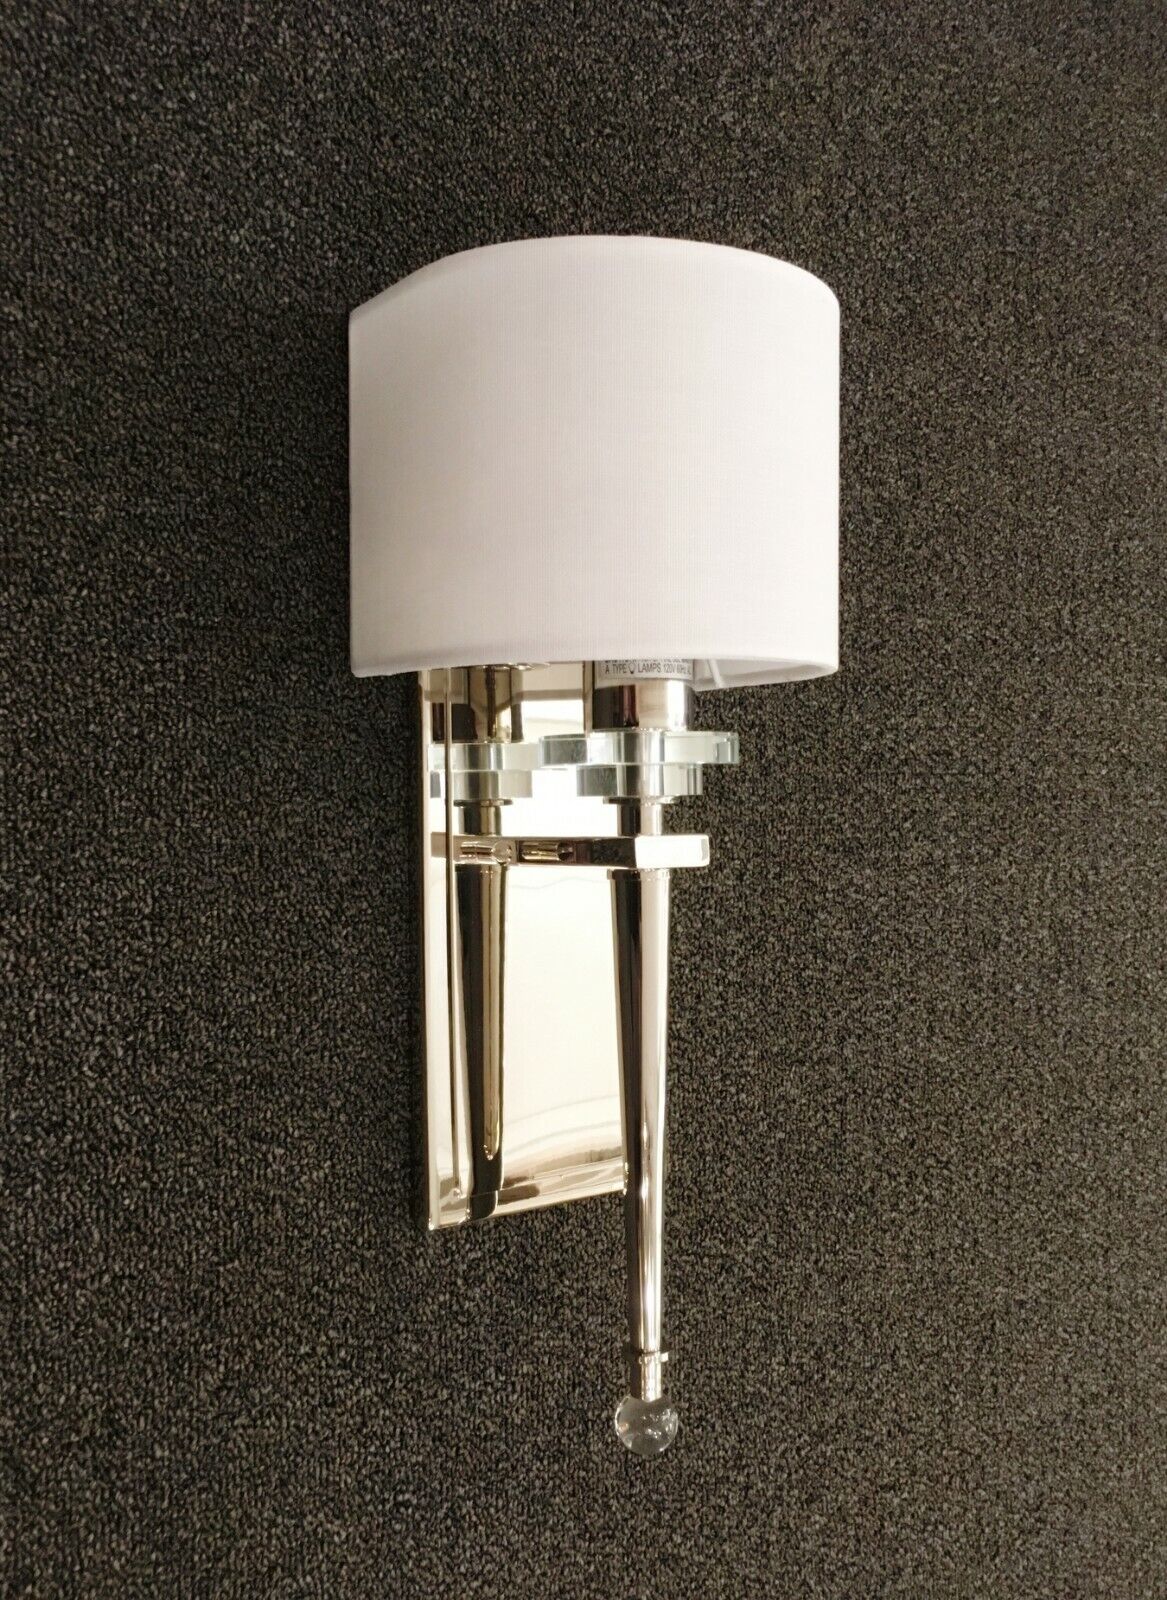 Polished Nickel Modern Wall Sconce Light with Wrap Around Shade/Crystal Accents